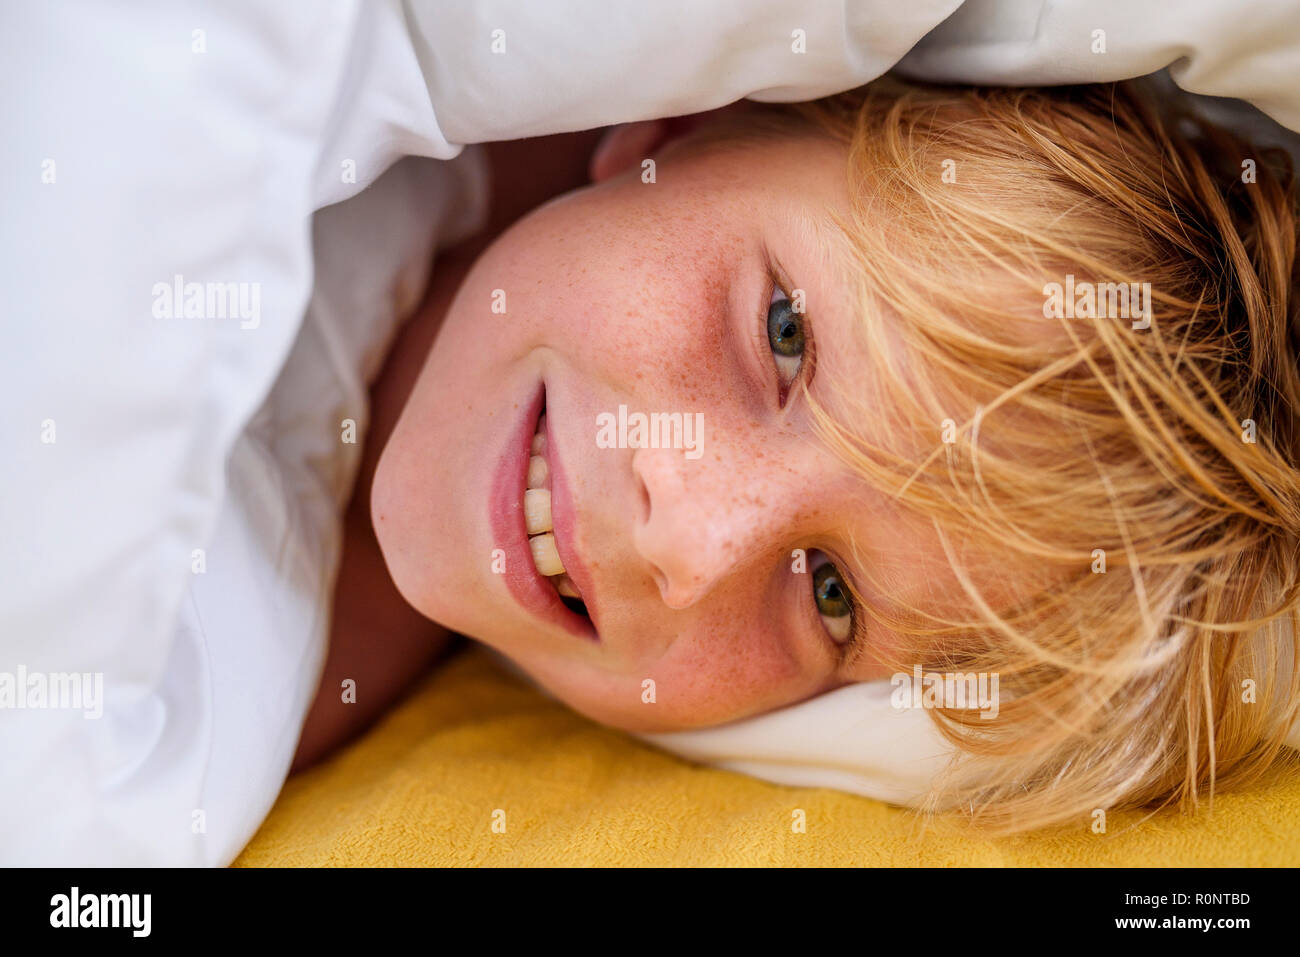 Portrait of a smiling boy lying in bed Stock Photo